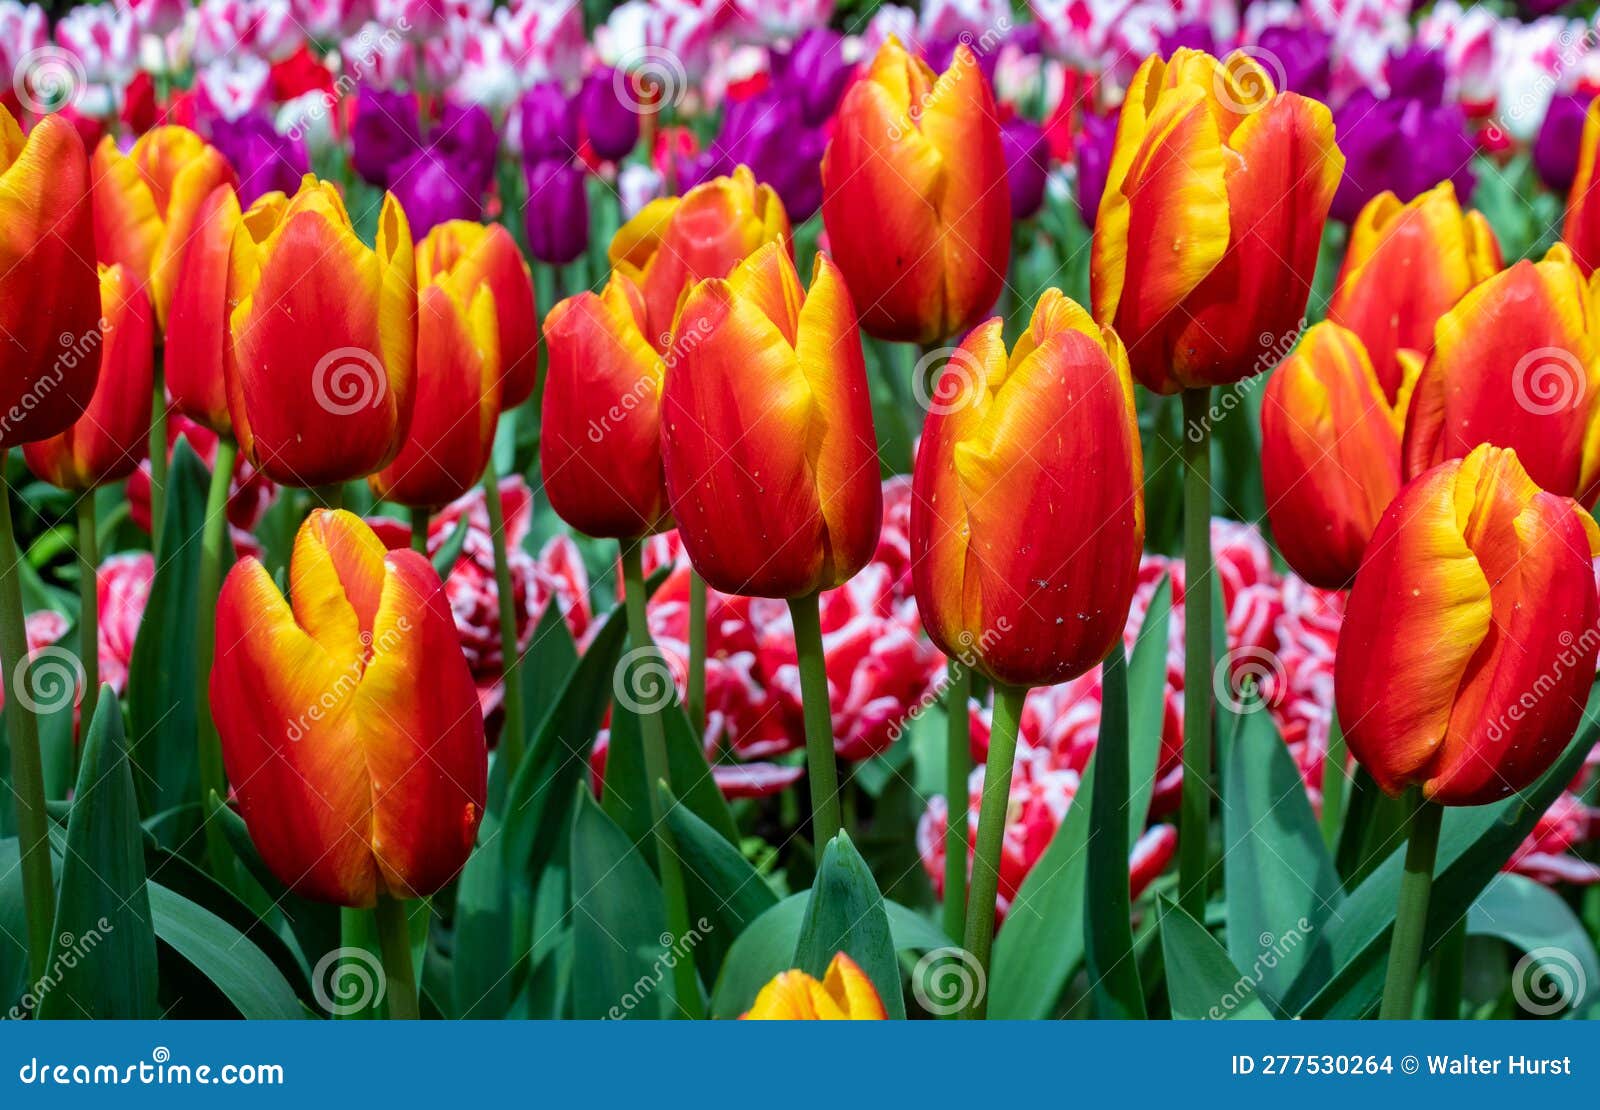 field of tulipan gesneriana l, orange and yellow in color